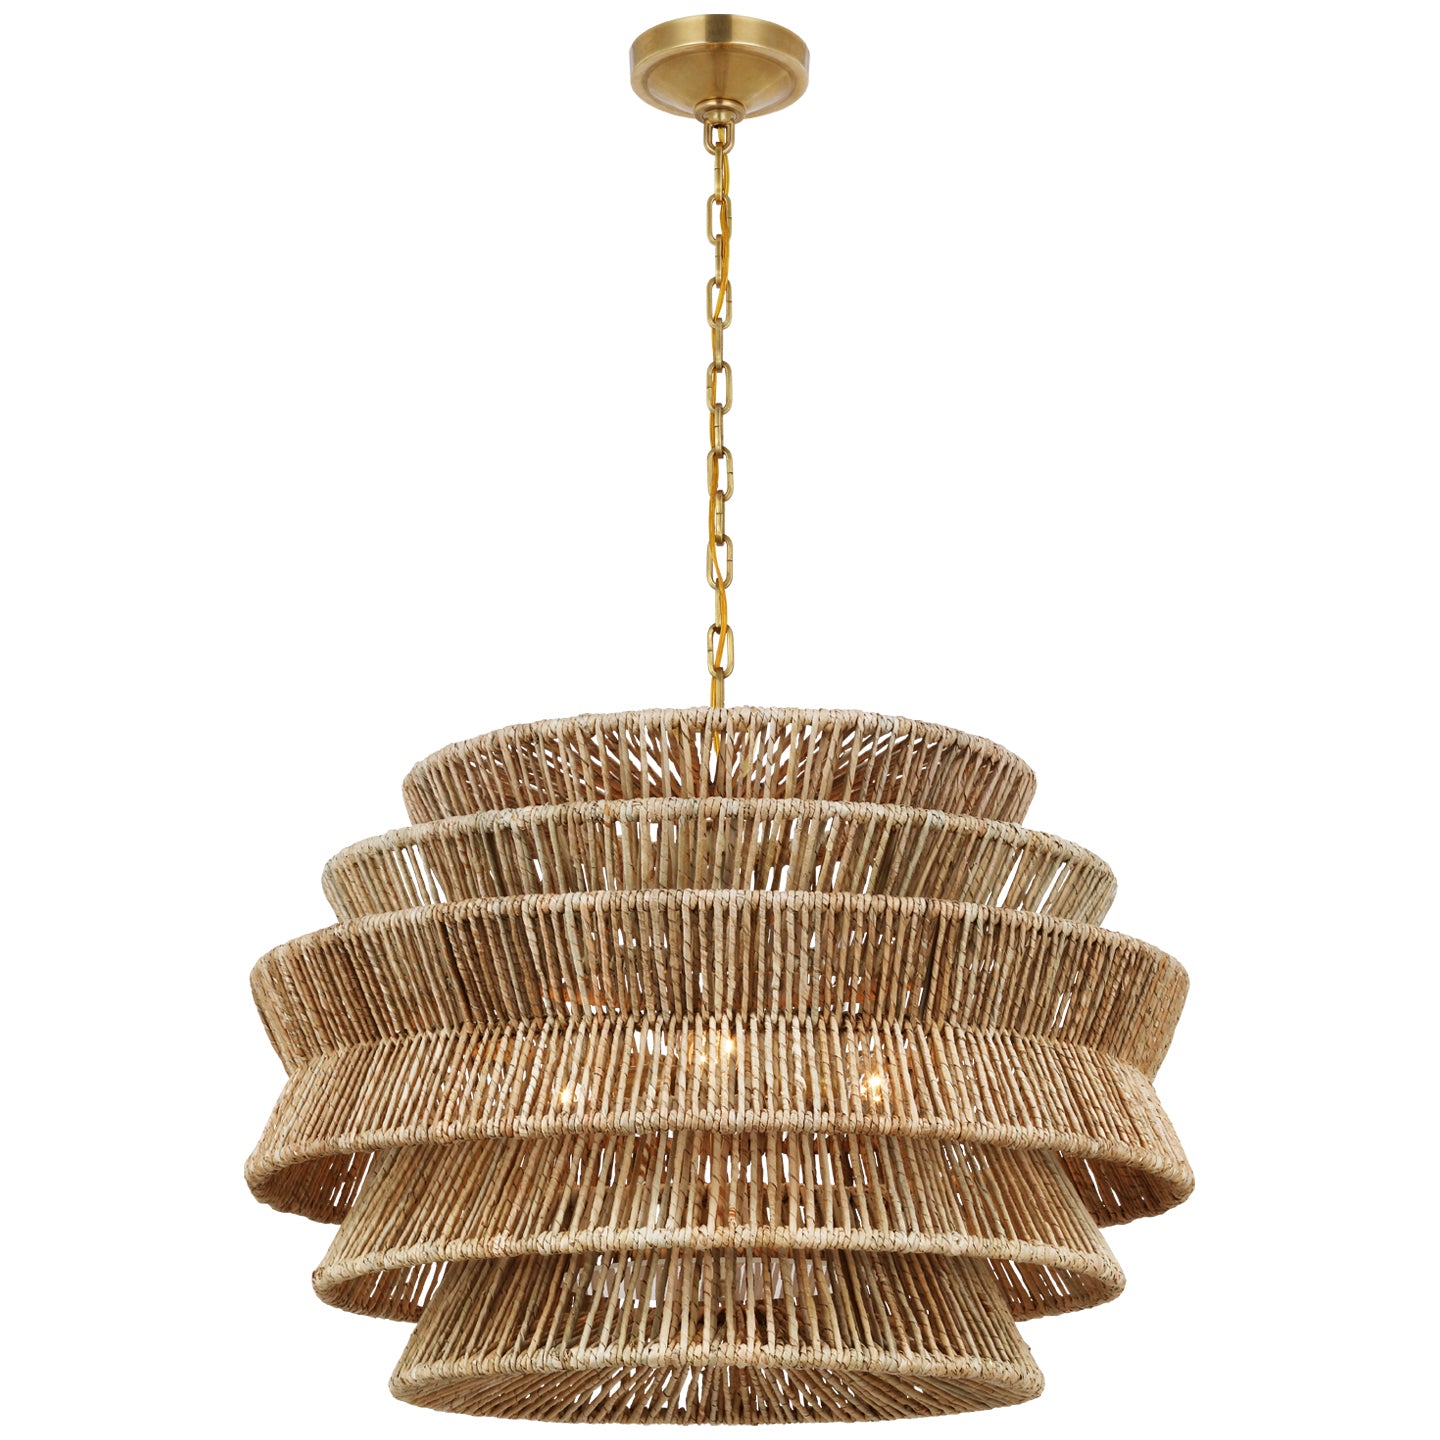 Visual Comfort Signature - CHC 5016AB/NAB - LED Chandelier - Antigua - Antique-Burnished Brass and Natural Abaca